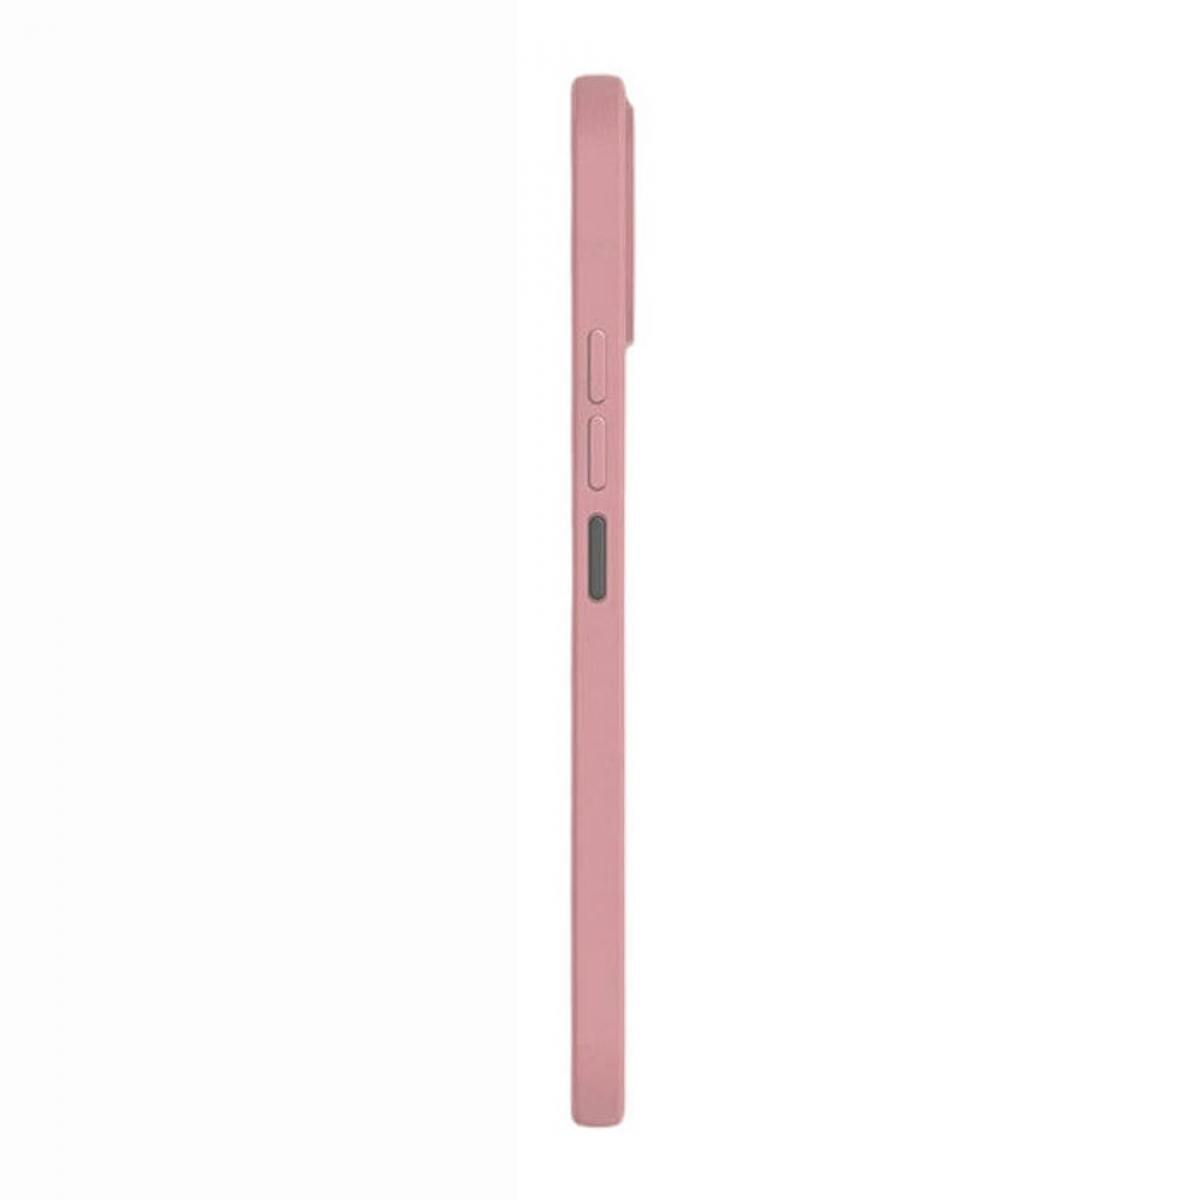 Hülle, Pink Liquid CASEONLINE OnePlus, Sand Pro Backcover, 10 5G,